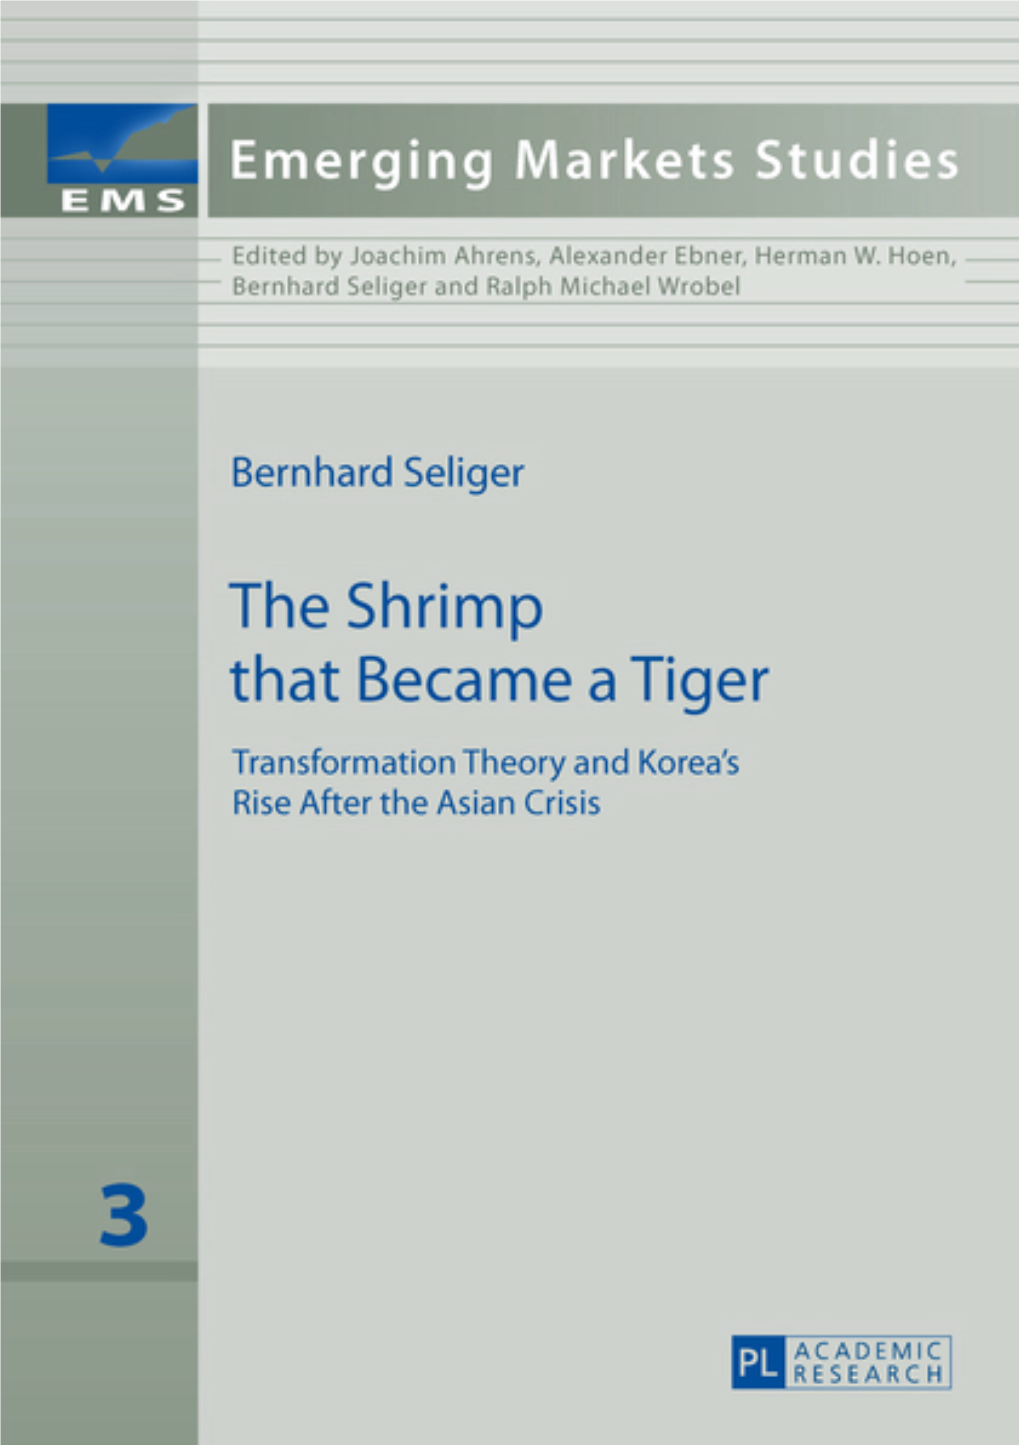 The Shrimp That Became a Tiger. Transformation Theory and Korea's Rise After the Asian Crisis